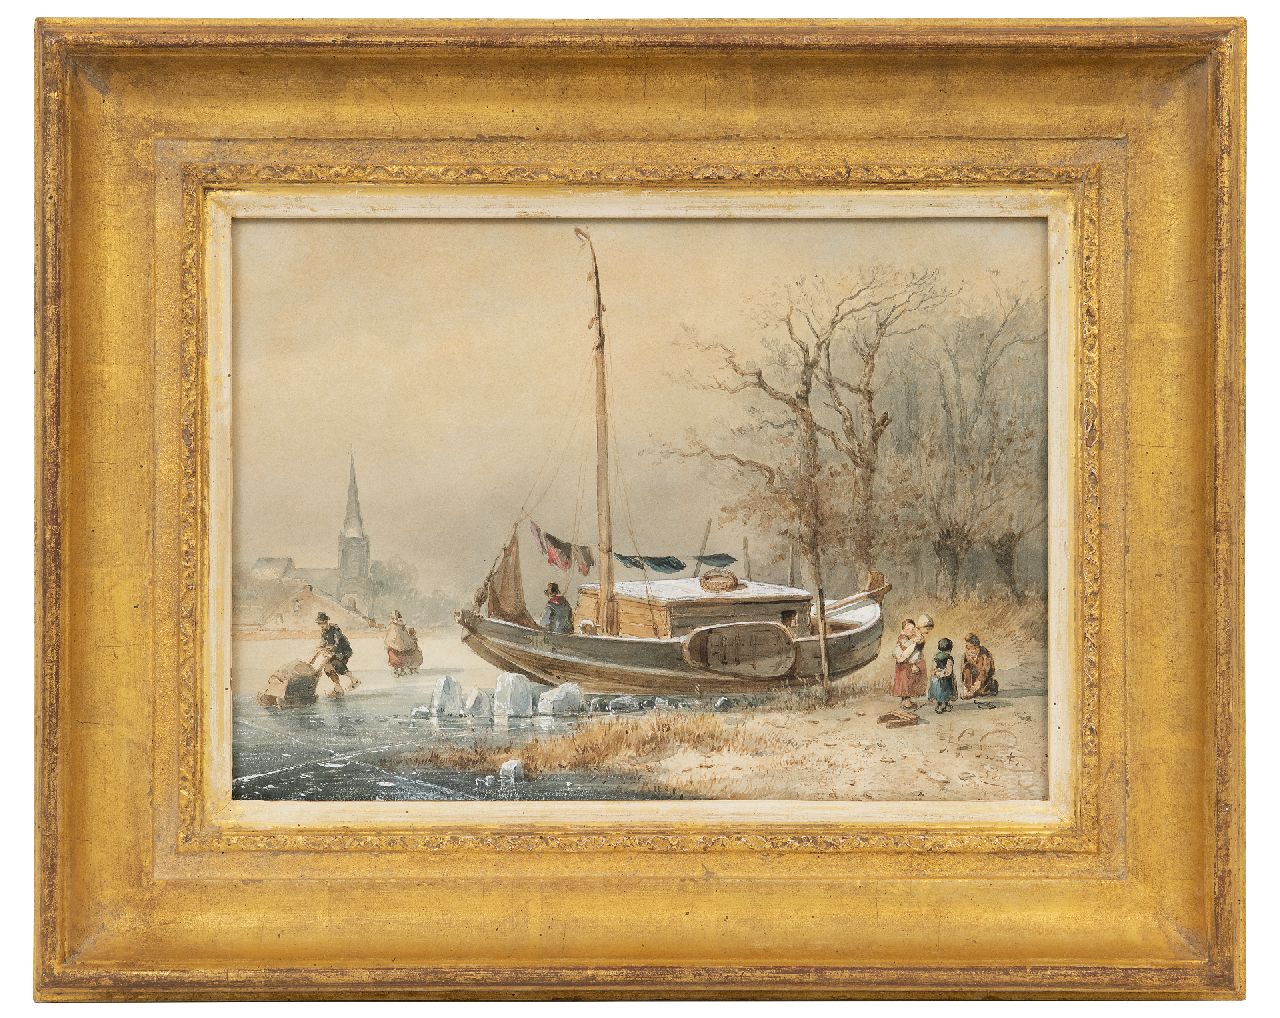 Smits J.G.  | Jan Gerard Smits | Watercolours and drawings offered for sale | Winter landscape with frozen ship, watercolour on paper 22.0 x 30.0 cm, signed l.r. and dated '50